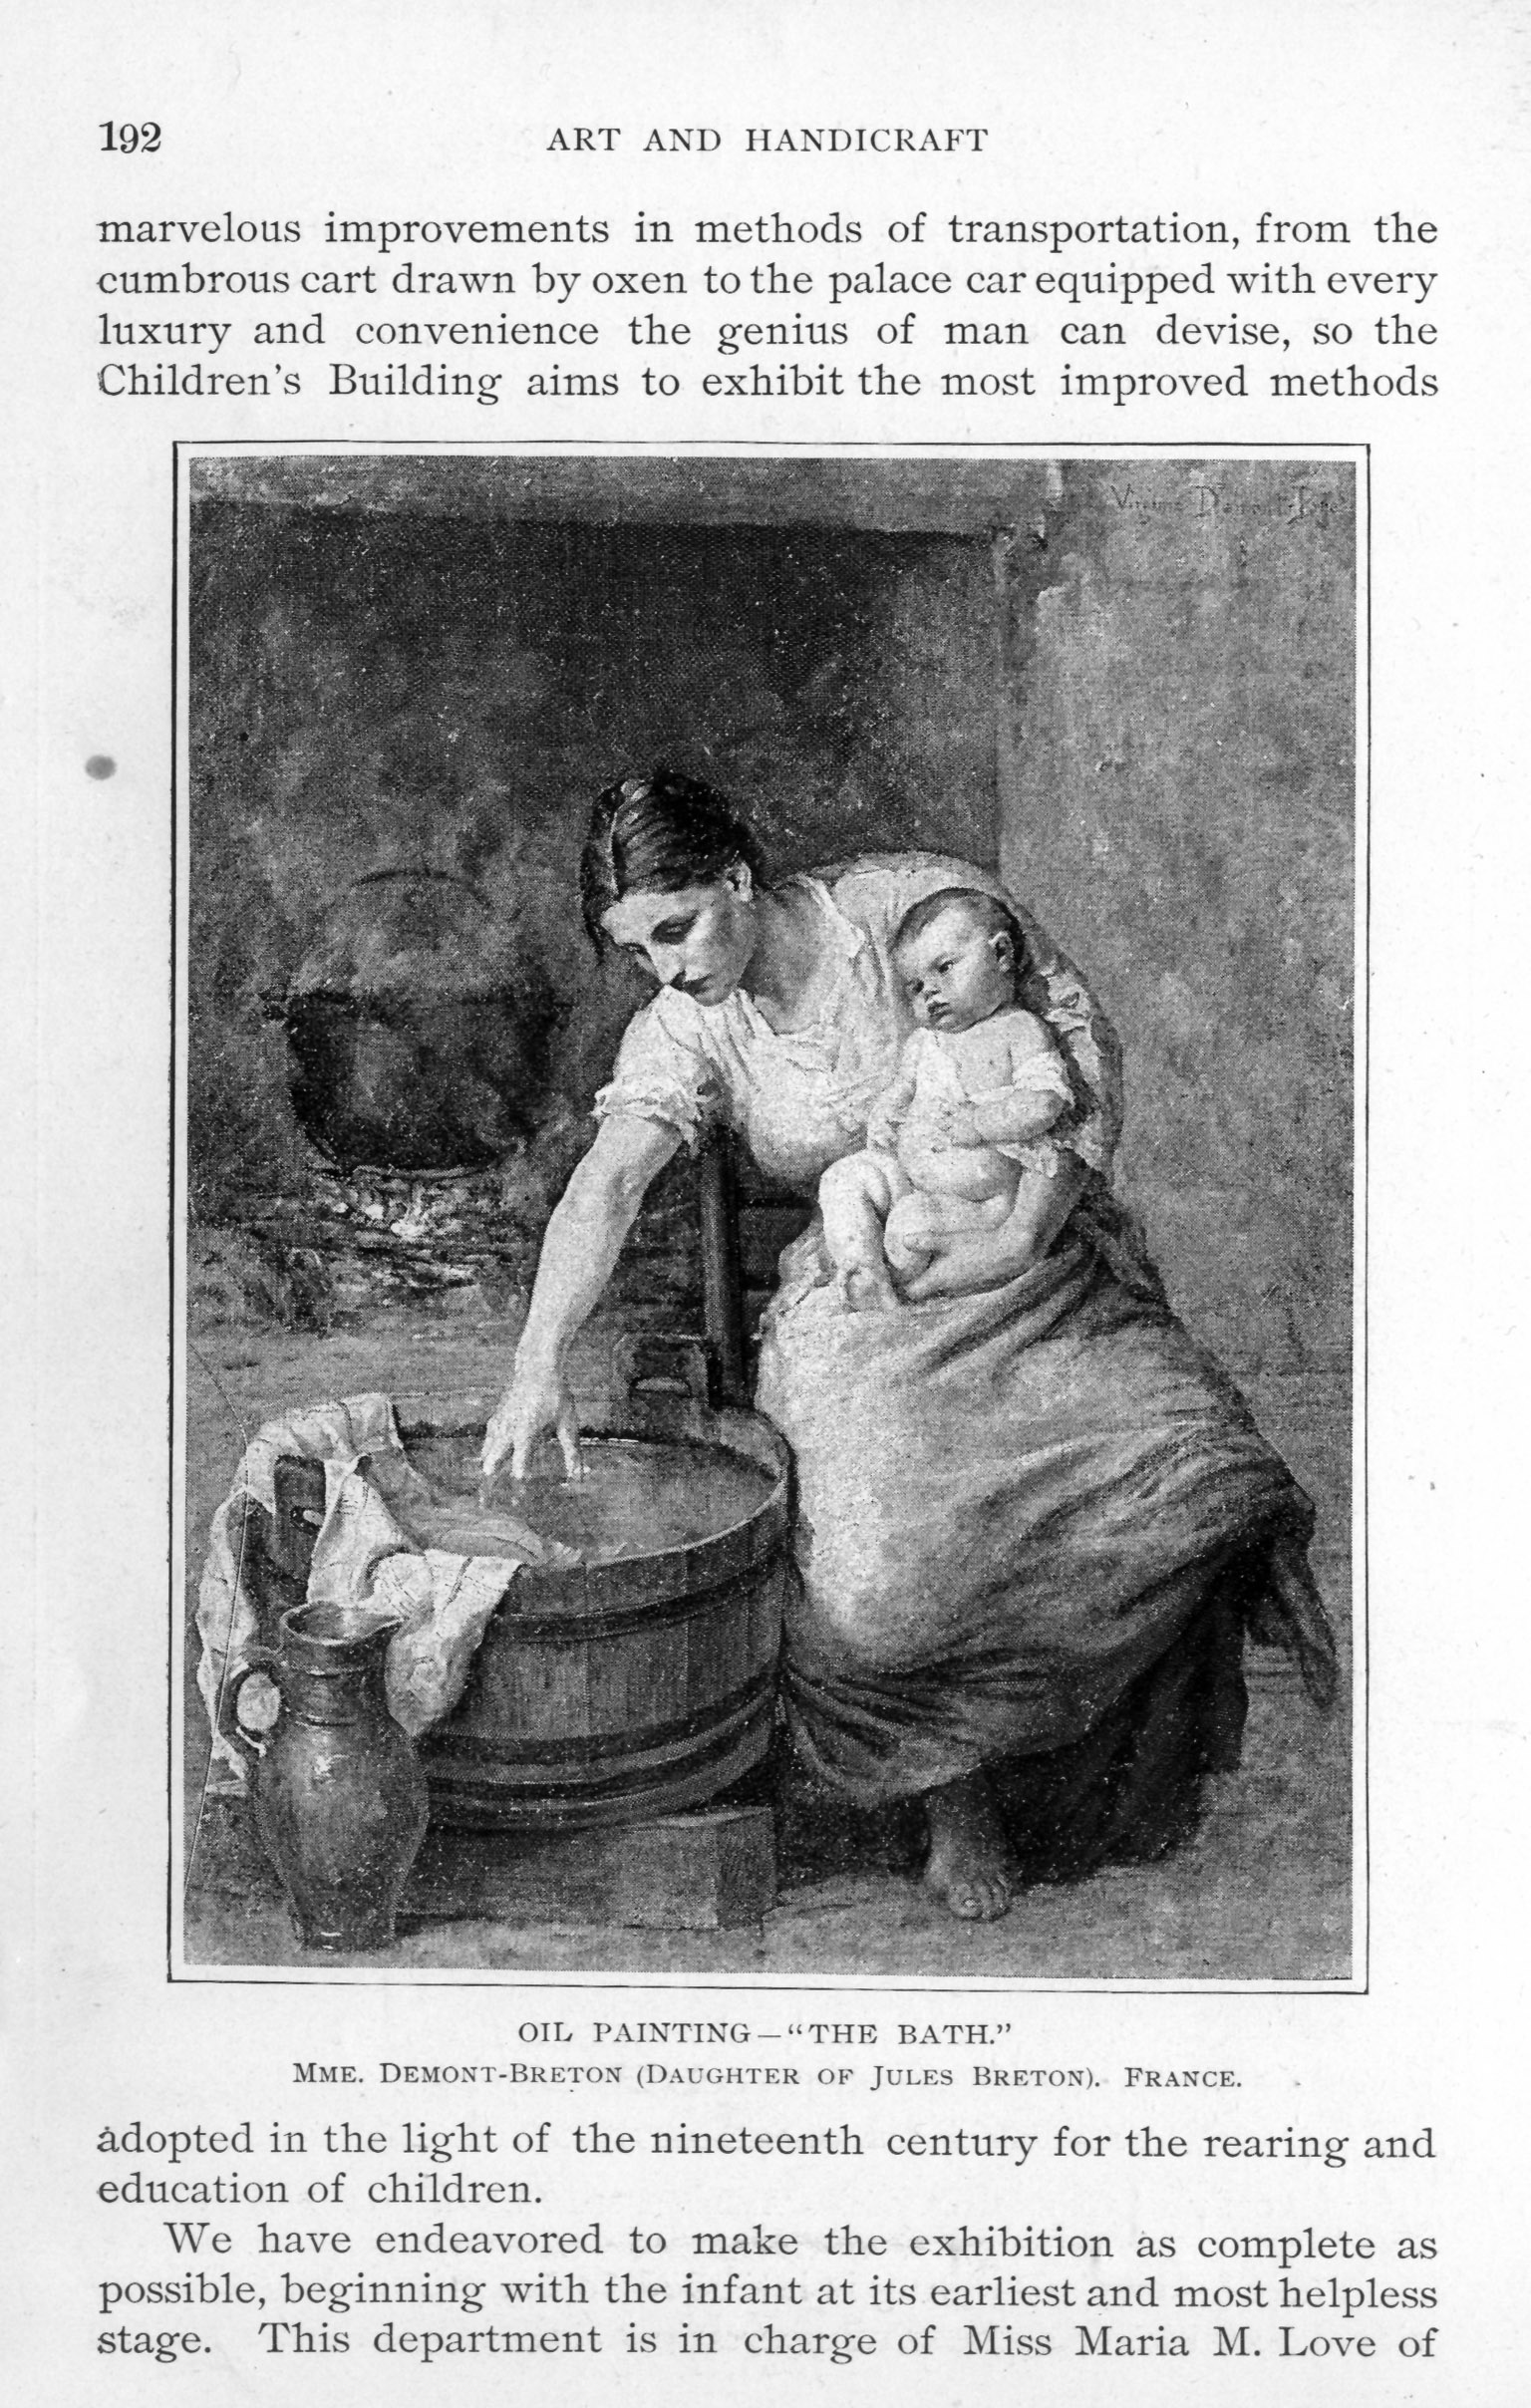 barefoot peasant woman holding baby and testing water with her hand in a wooden washbasin